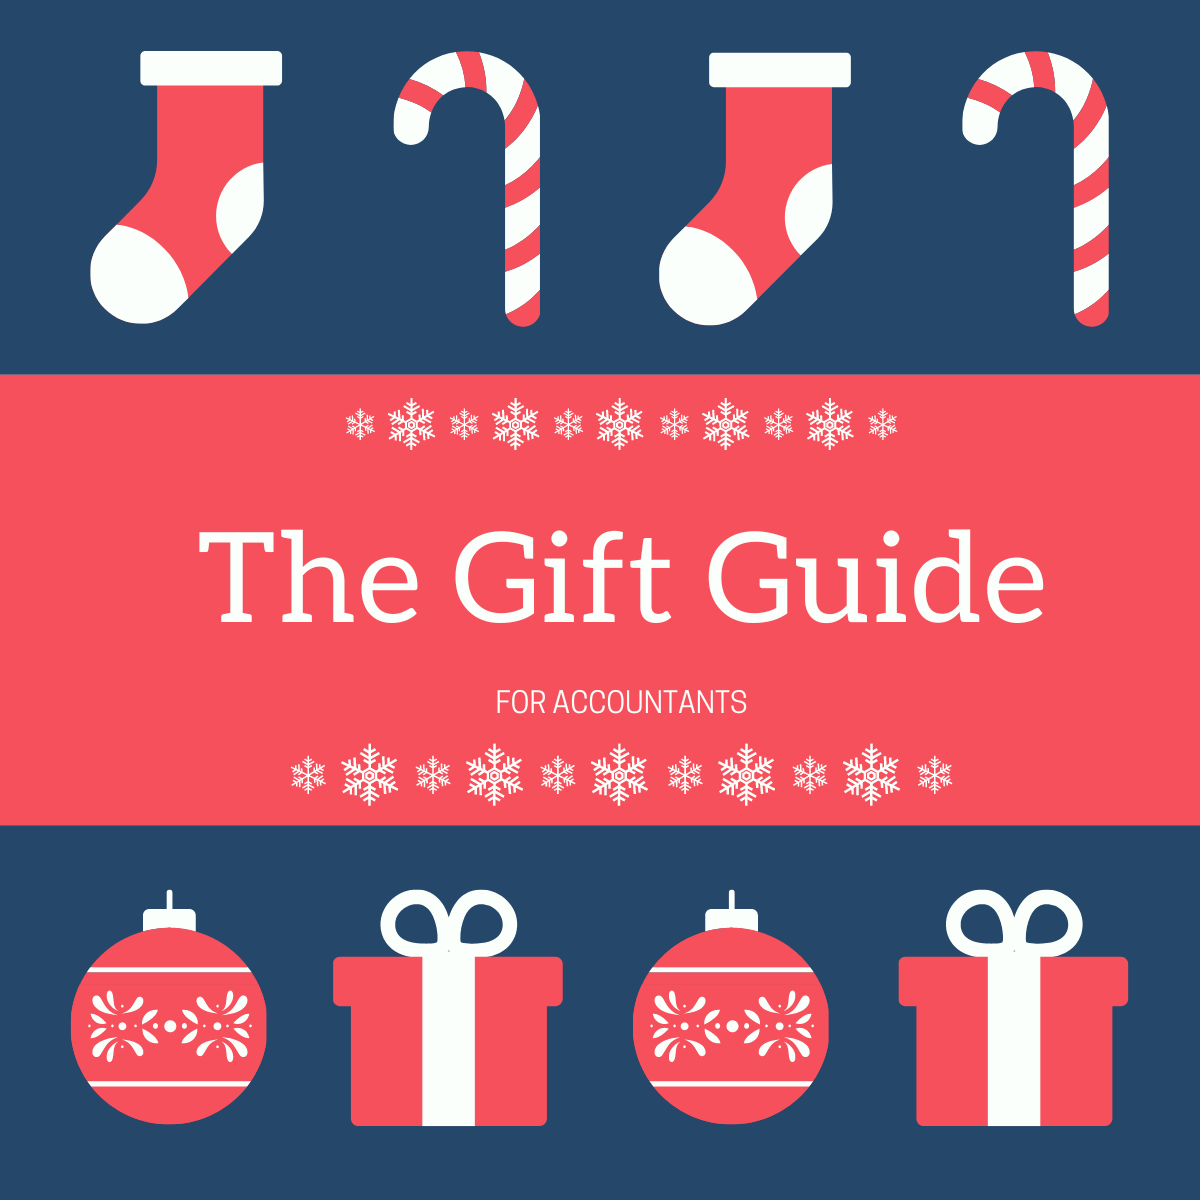 10 Gift Ideas for Accountants - Accounting Seed